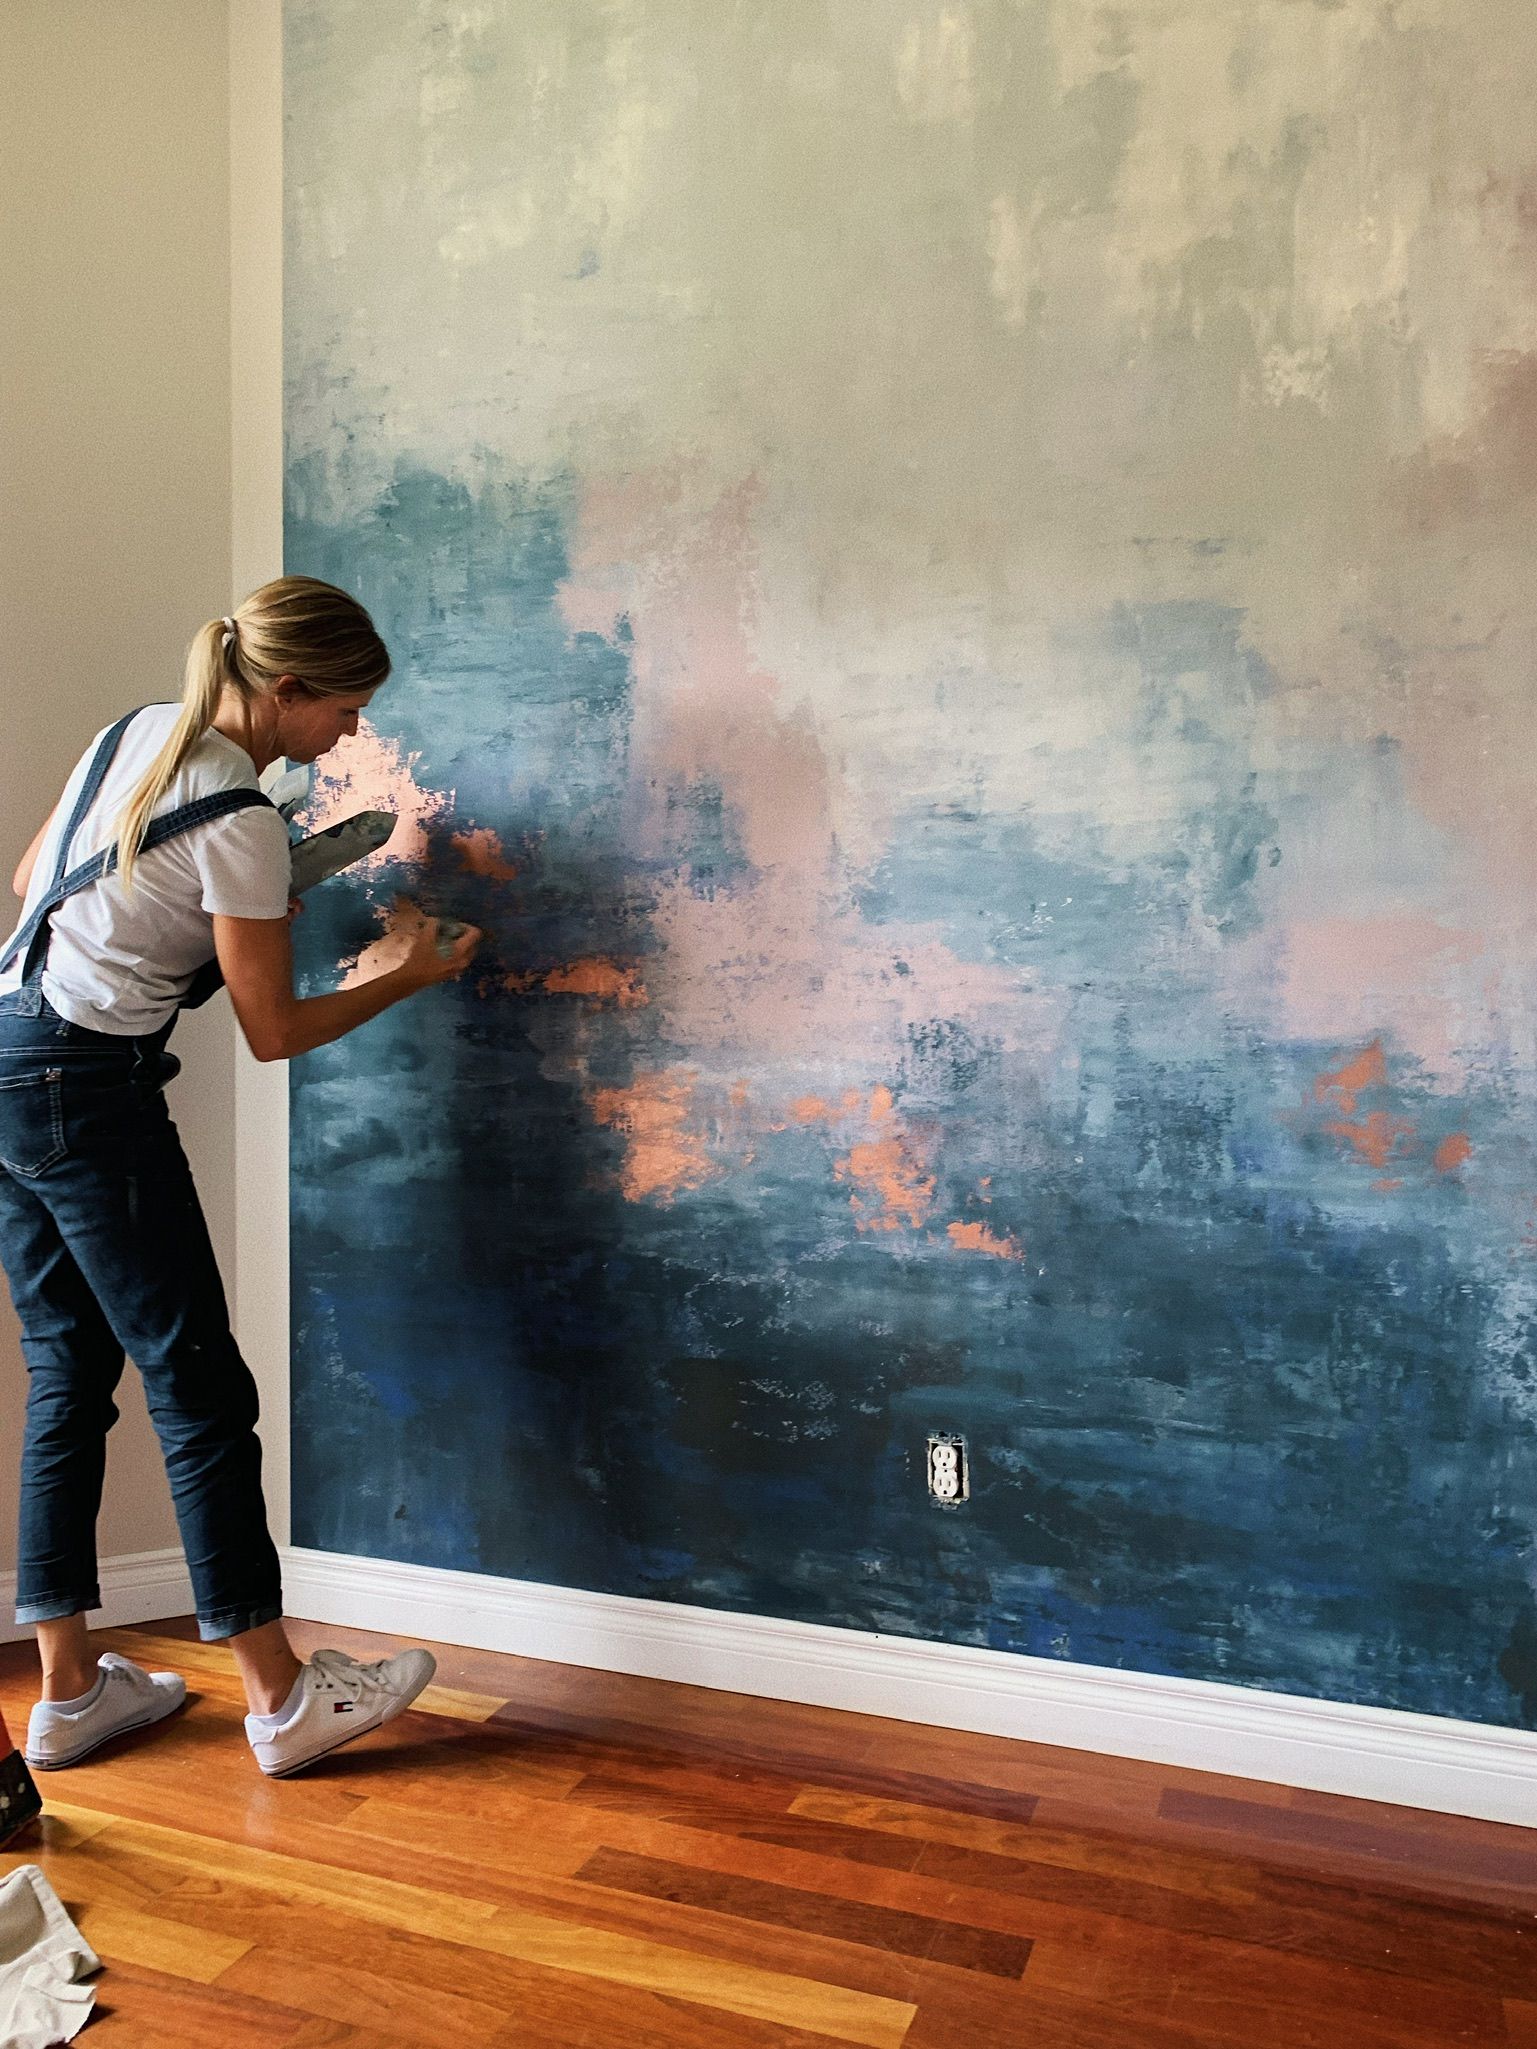 Bold and Beautiful: Wall Painting Ideas
to Make a Statement